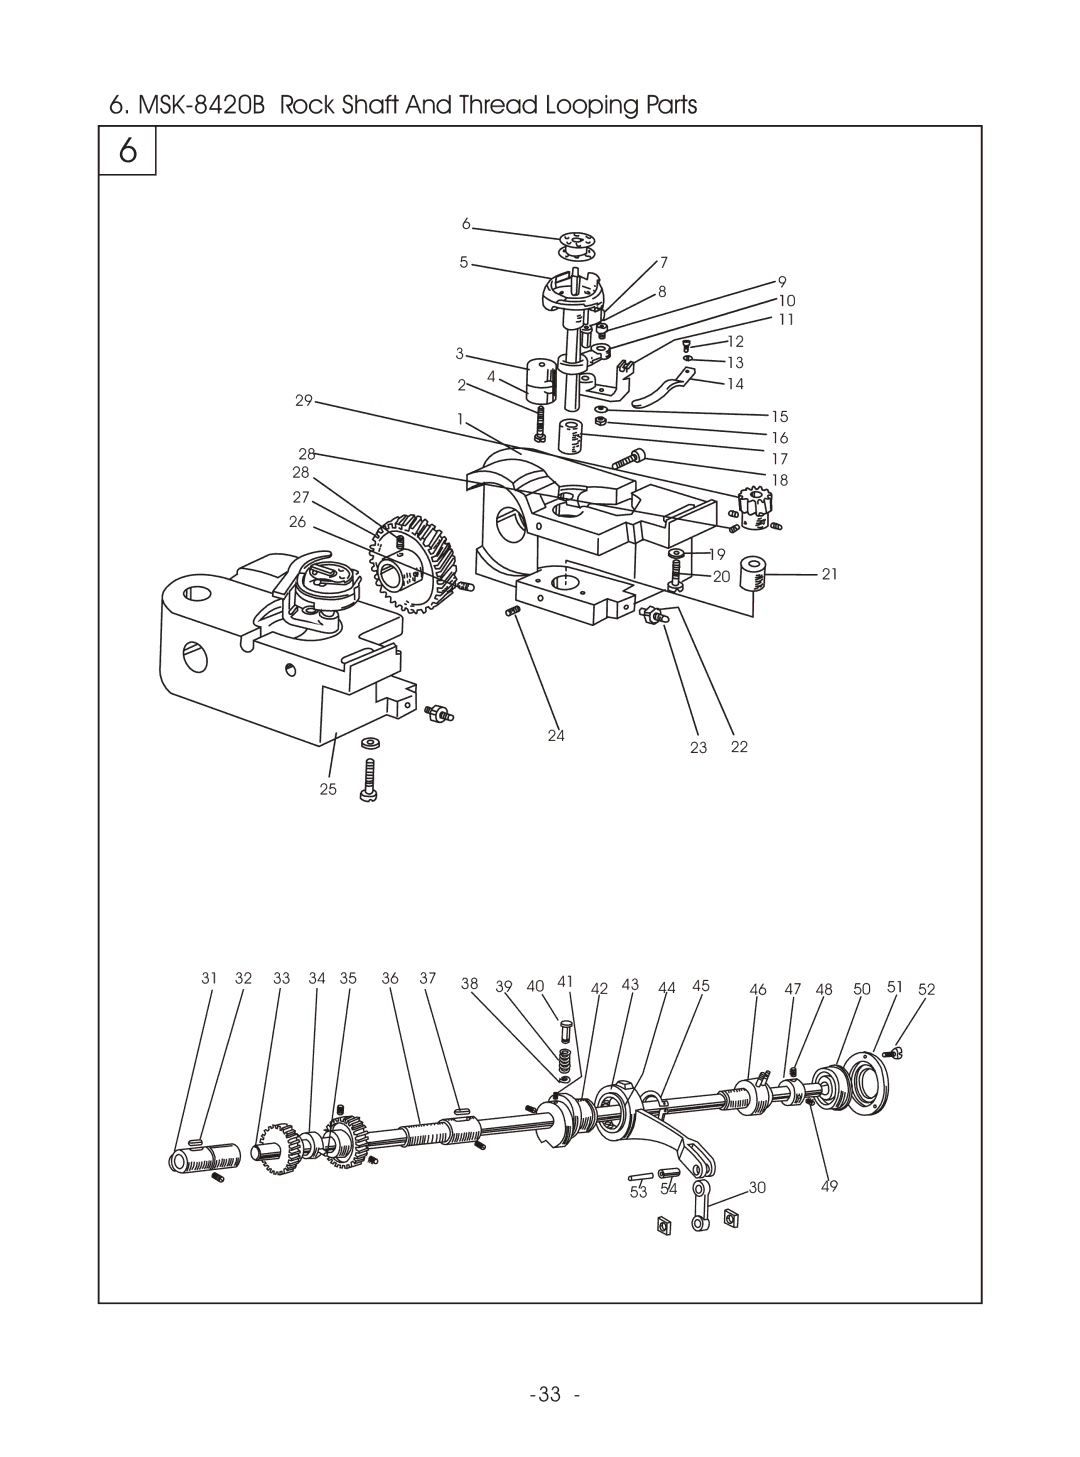 Reliable MSK-8420B instruction manual £-33£ 